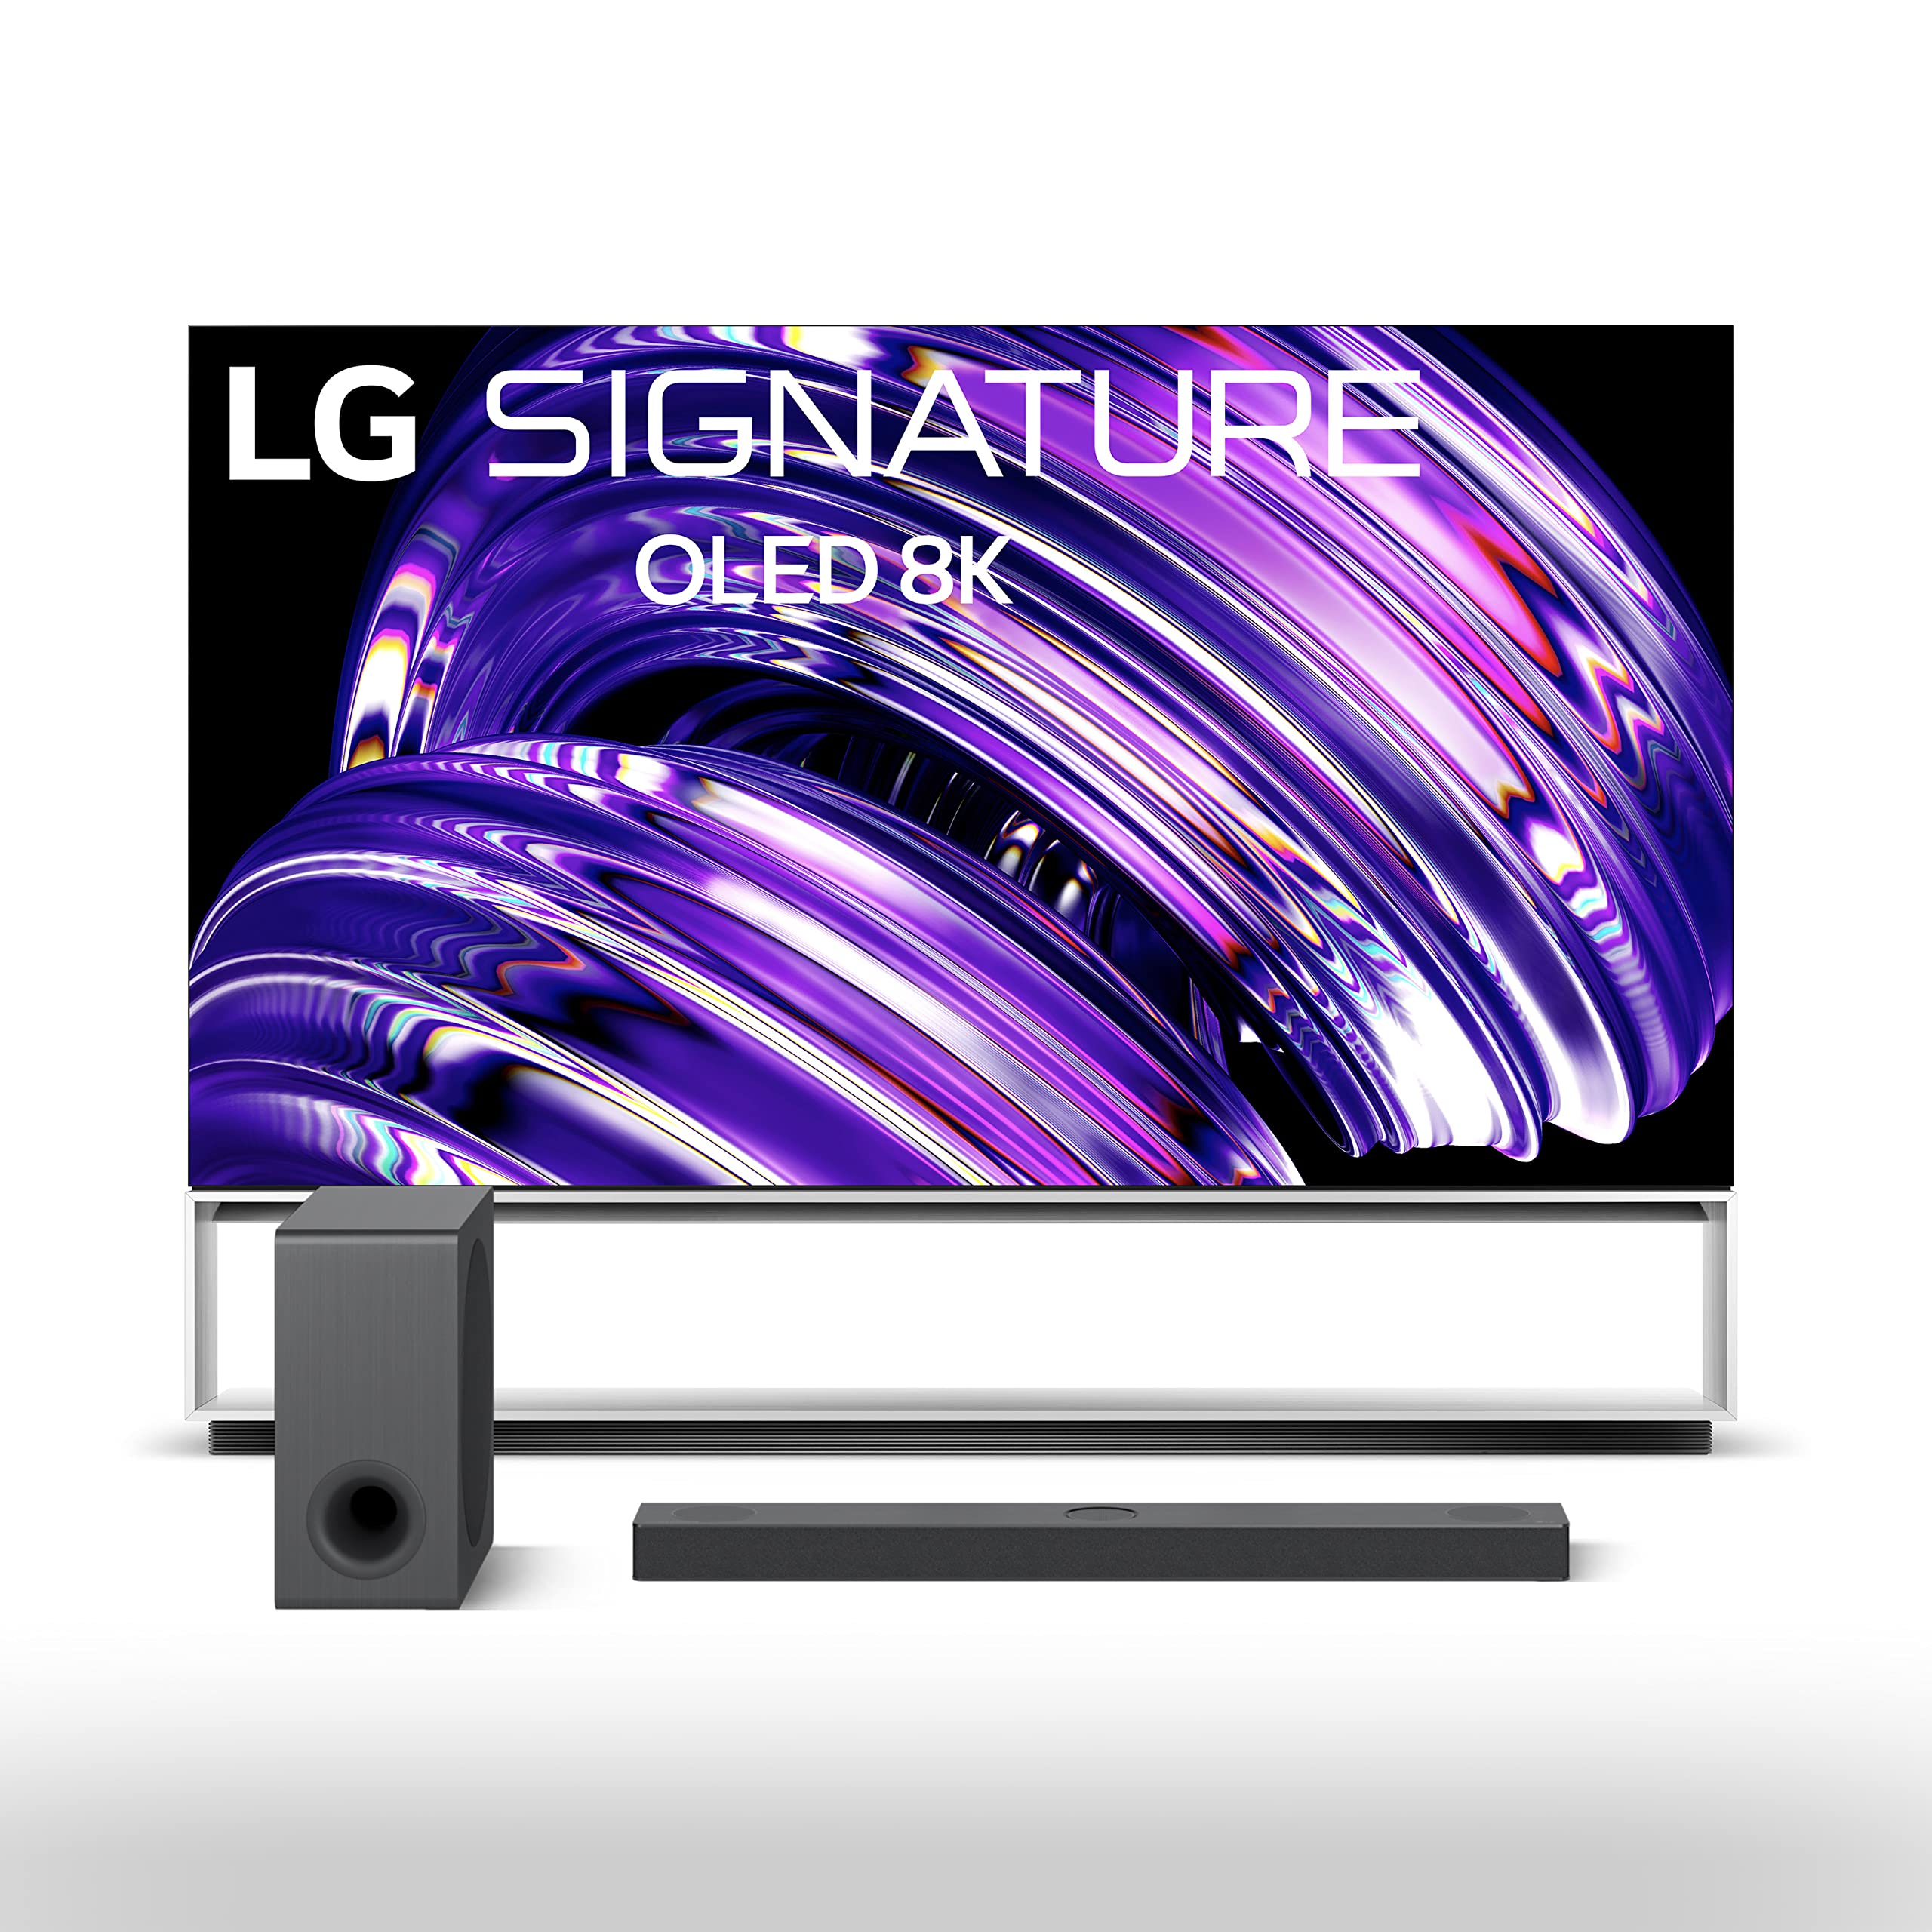 LG Signature 88-inch Class OLED Z2 Series 8K Smart TV with Alexa Built-in OLED88Z2PUA S80QY 3.1.3ch Sound Bar w/Center Up-Firing, Dolby Atmos DTS:X, Works w/Alexa, Hi-Res Audio, IMAX Enhanced